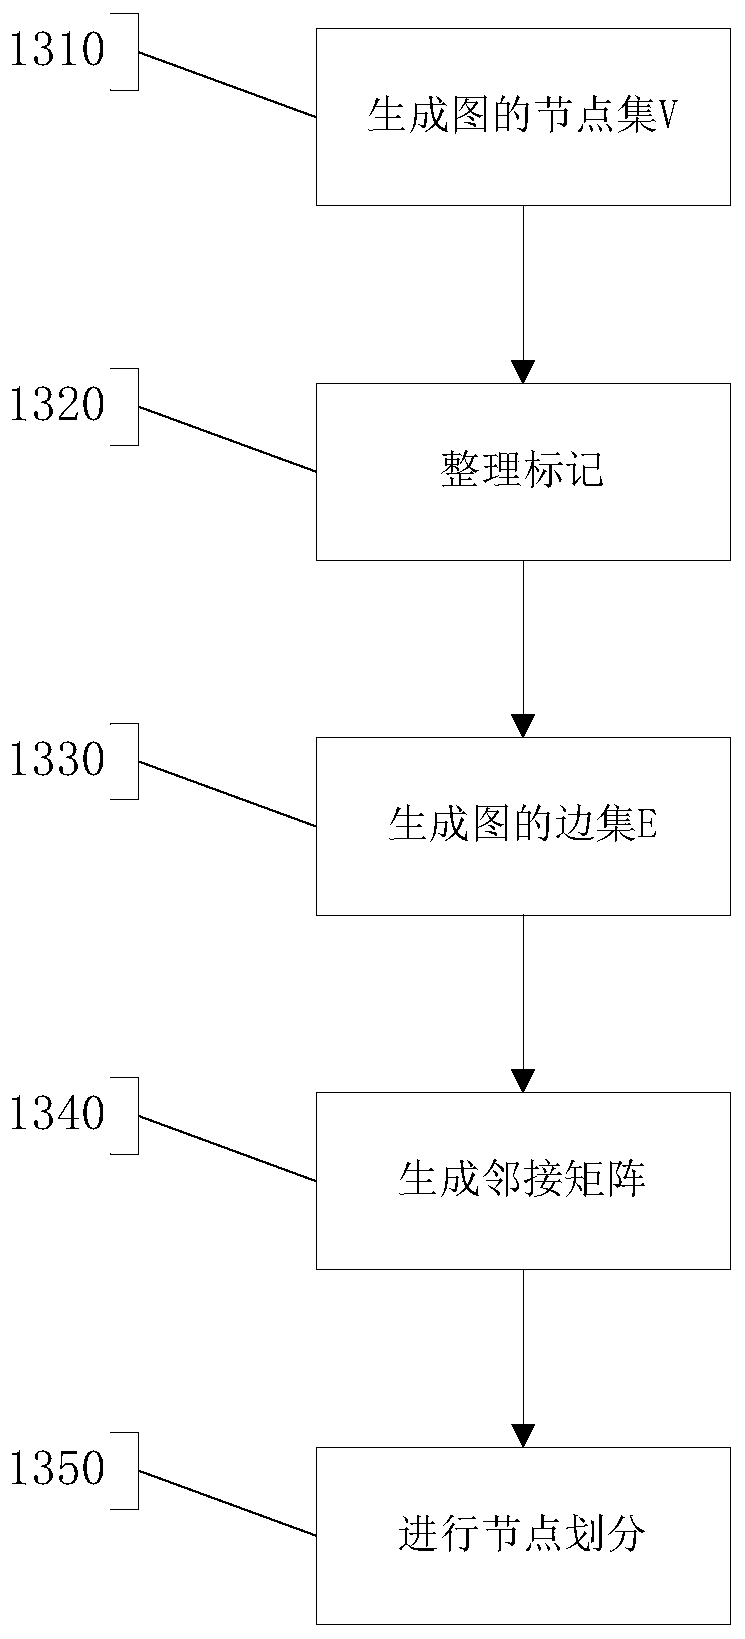 Automatic industry classification method and system